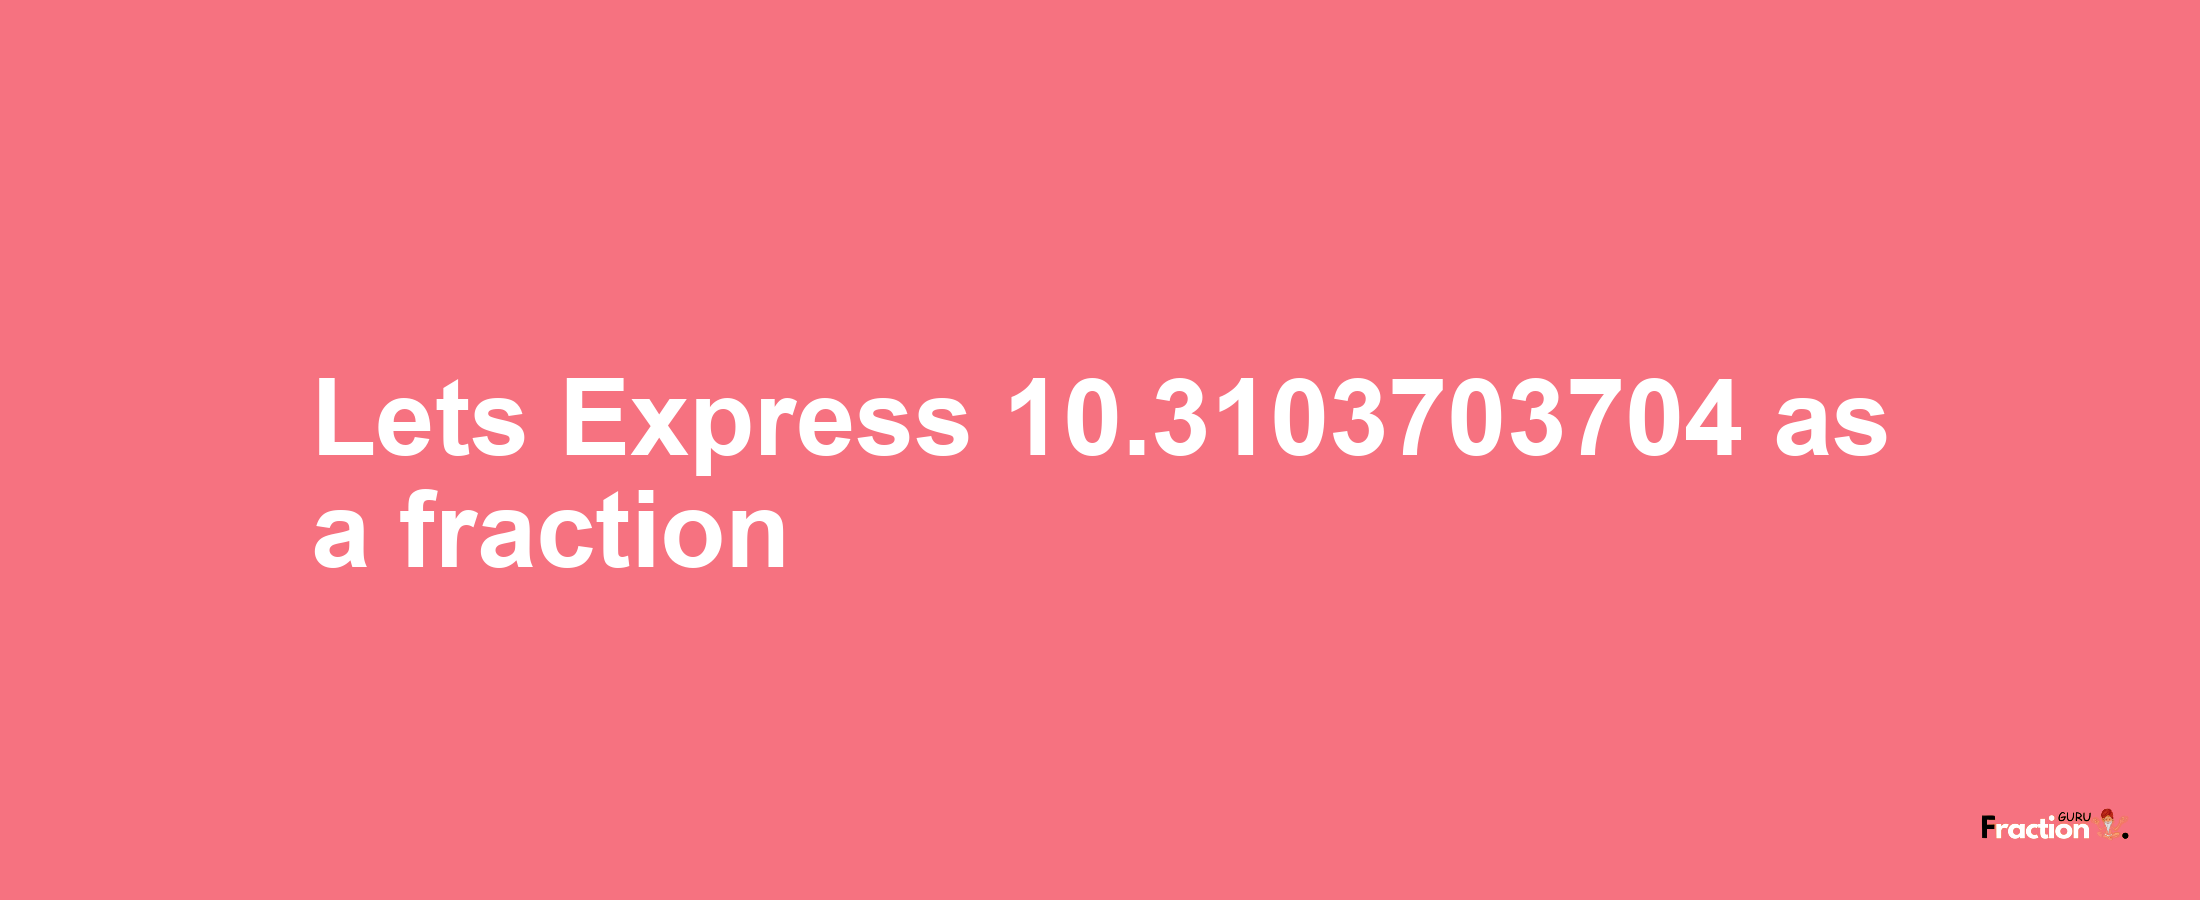 Lets Express 10.3103703704 as afraction